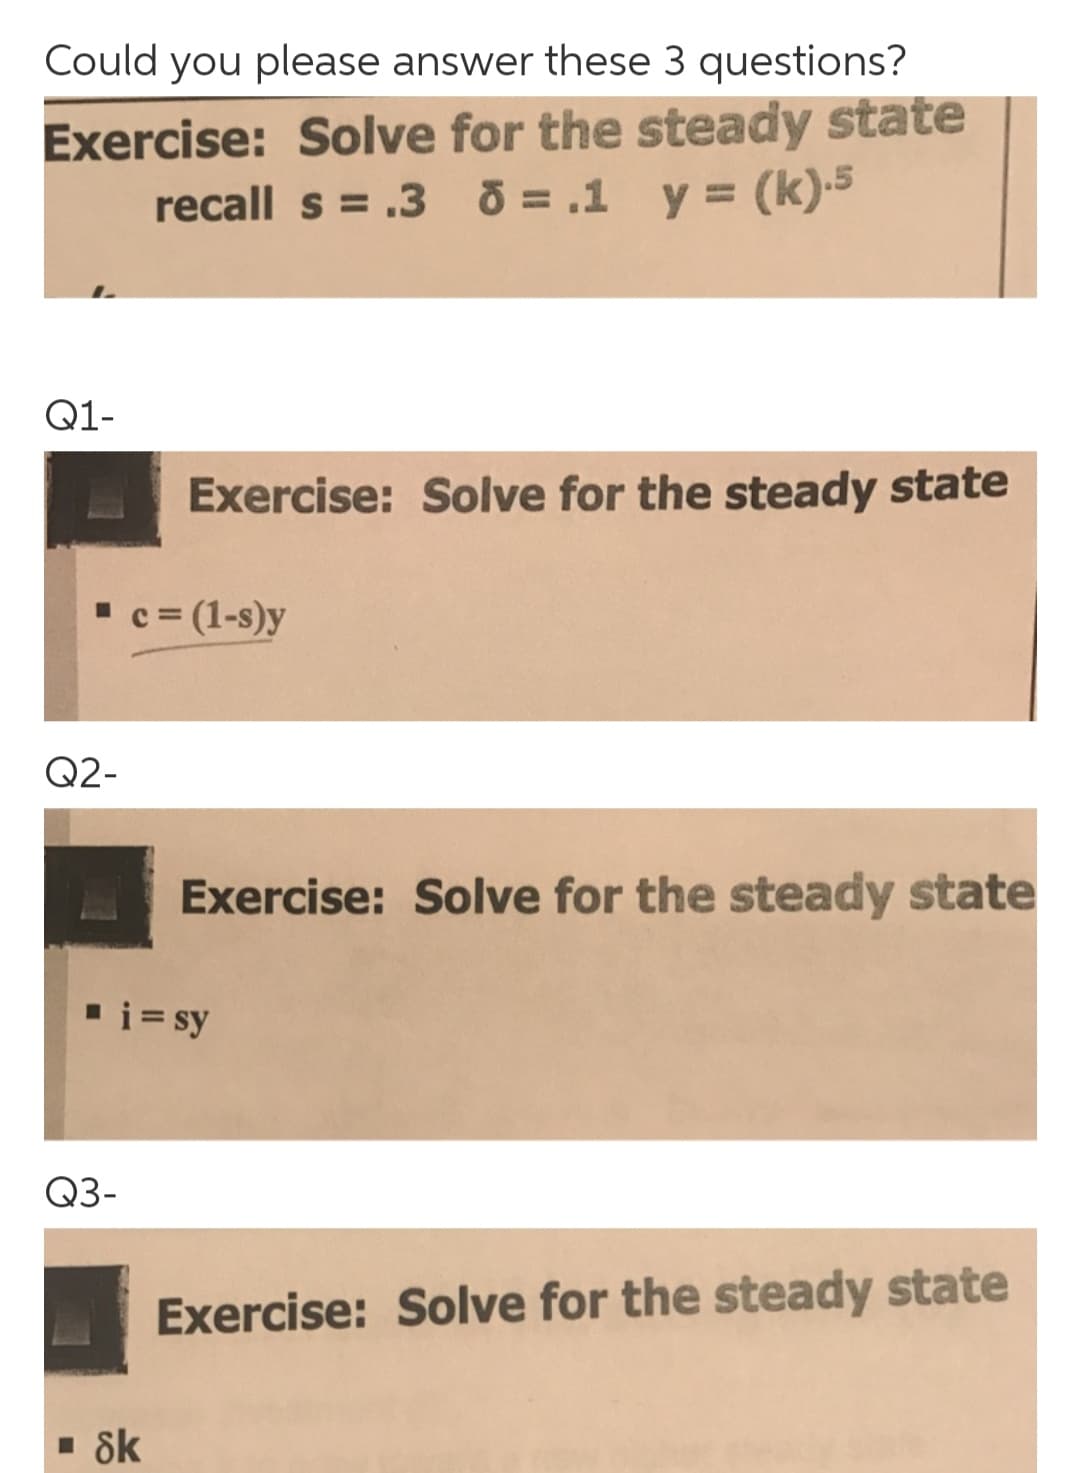 Could you please answer these 3 questions?
Exercise: Solve for the steady state
recall s = .3 O = .1 y = (k)-5
Q1-
Exercise: Solve for the steady state
" c = (1-s)y
Q2-
Exercise: Solve for the steady state
▪i = sy
Q3-
Exercise: Solve for the steady state
· 8k
